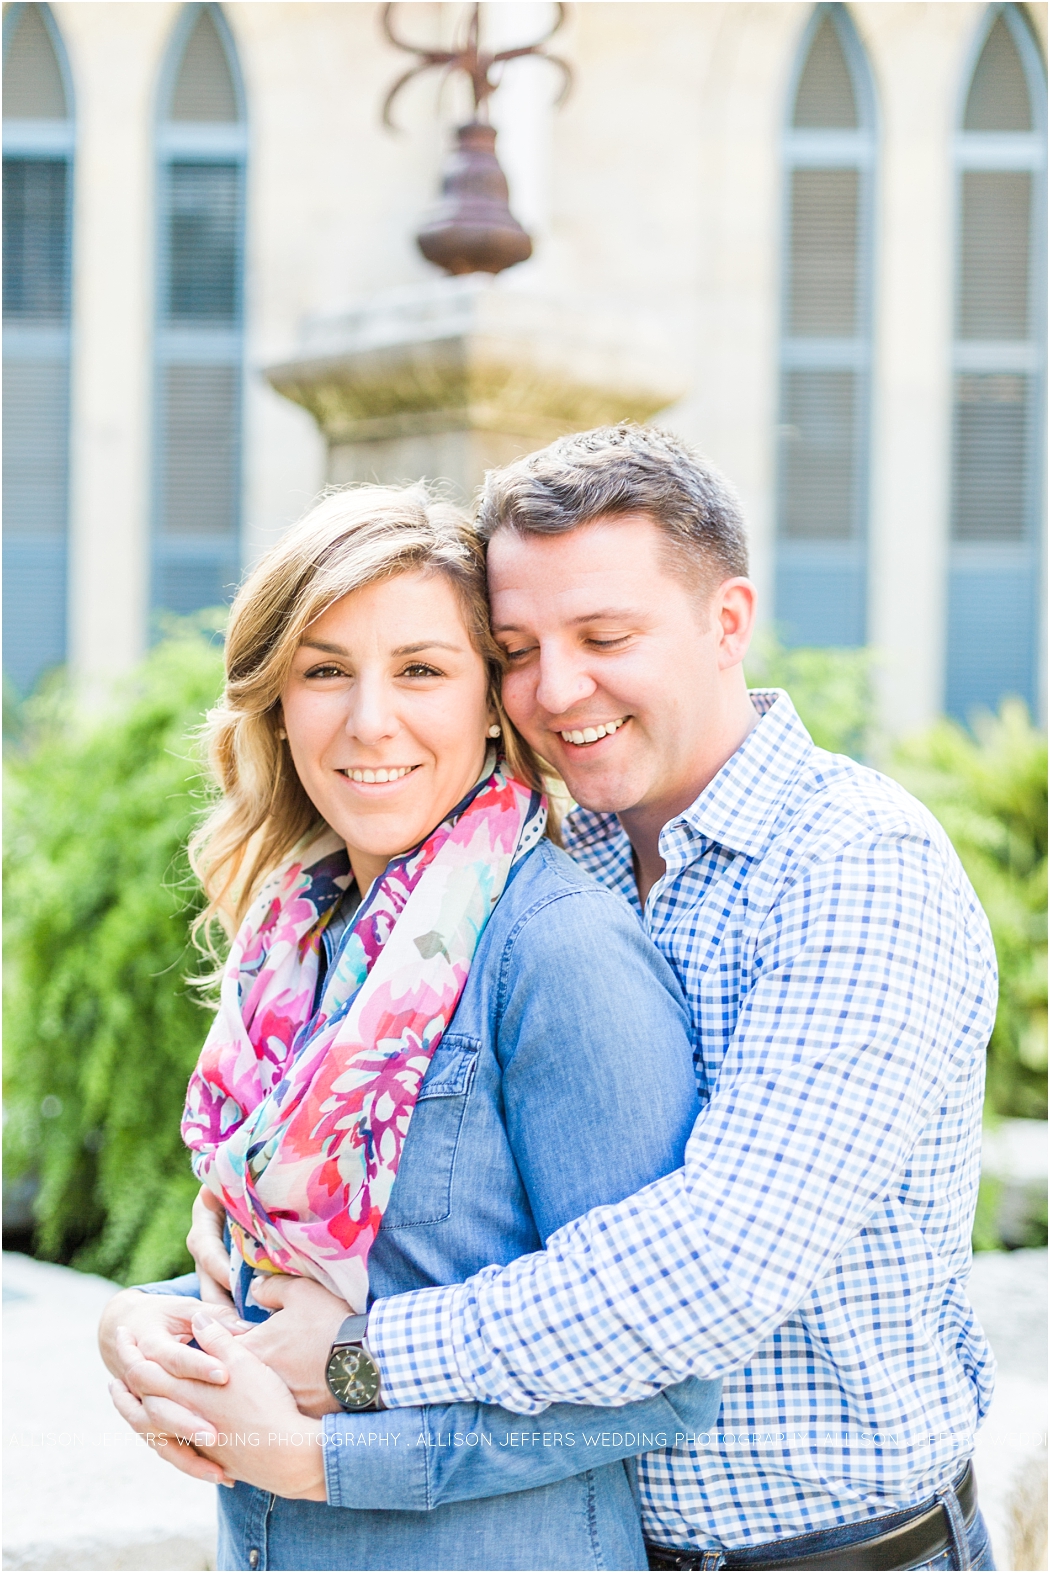 a-fall-engagement-session-at-southwest-school-of-art-in-san-antonio-by-allison-jeffers-wedding-photography_0005